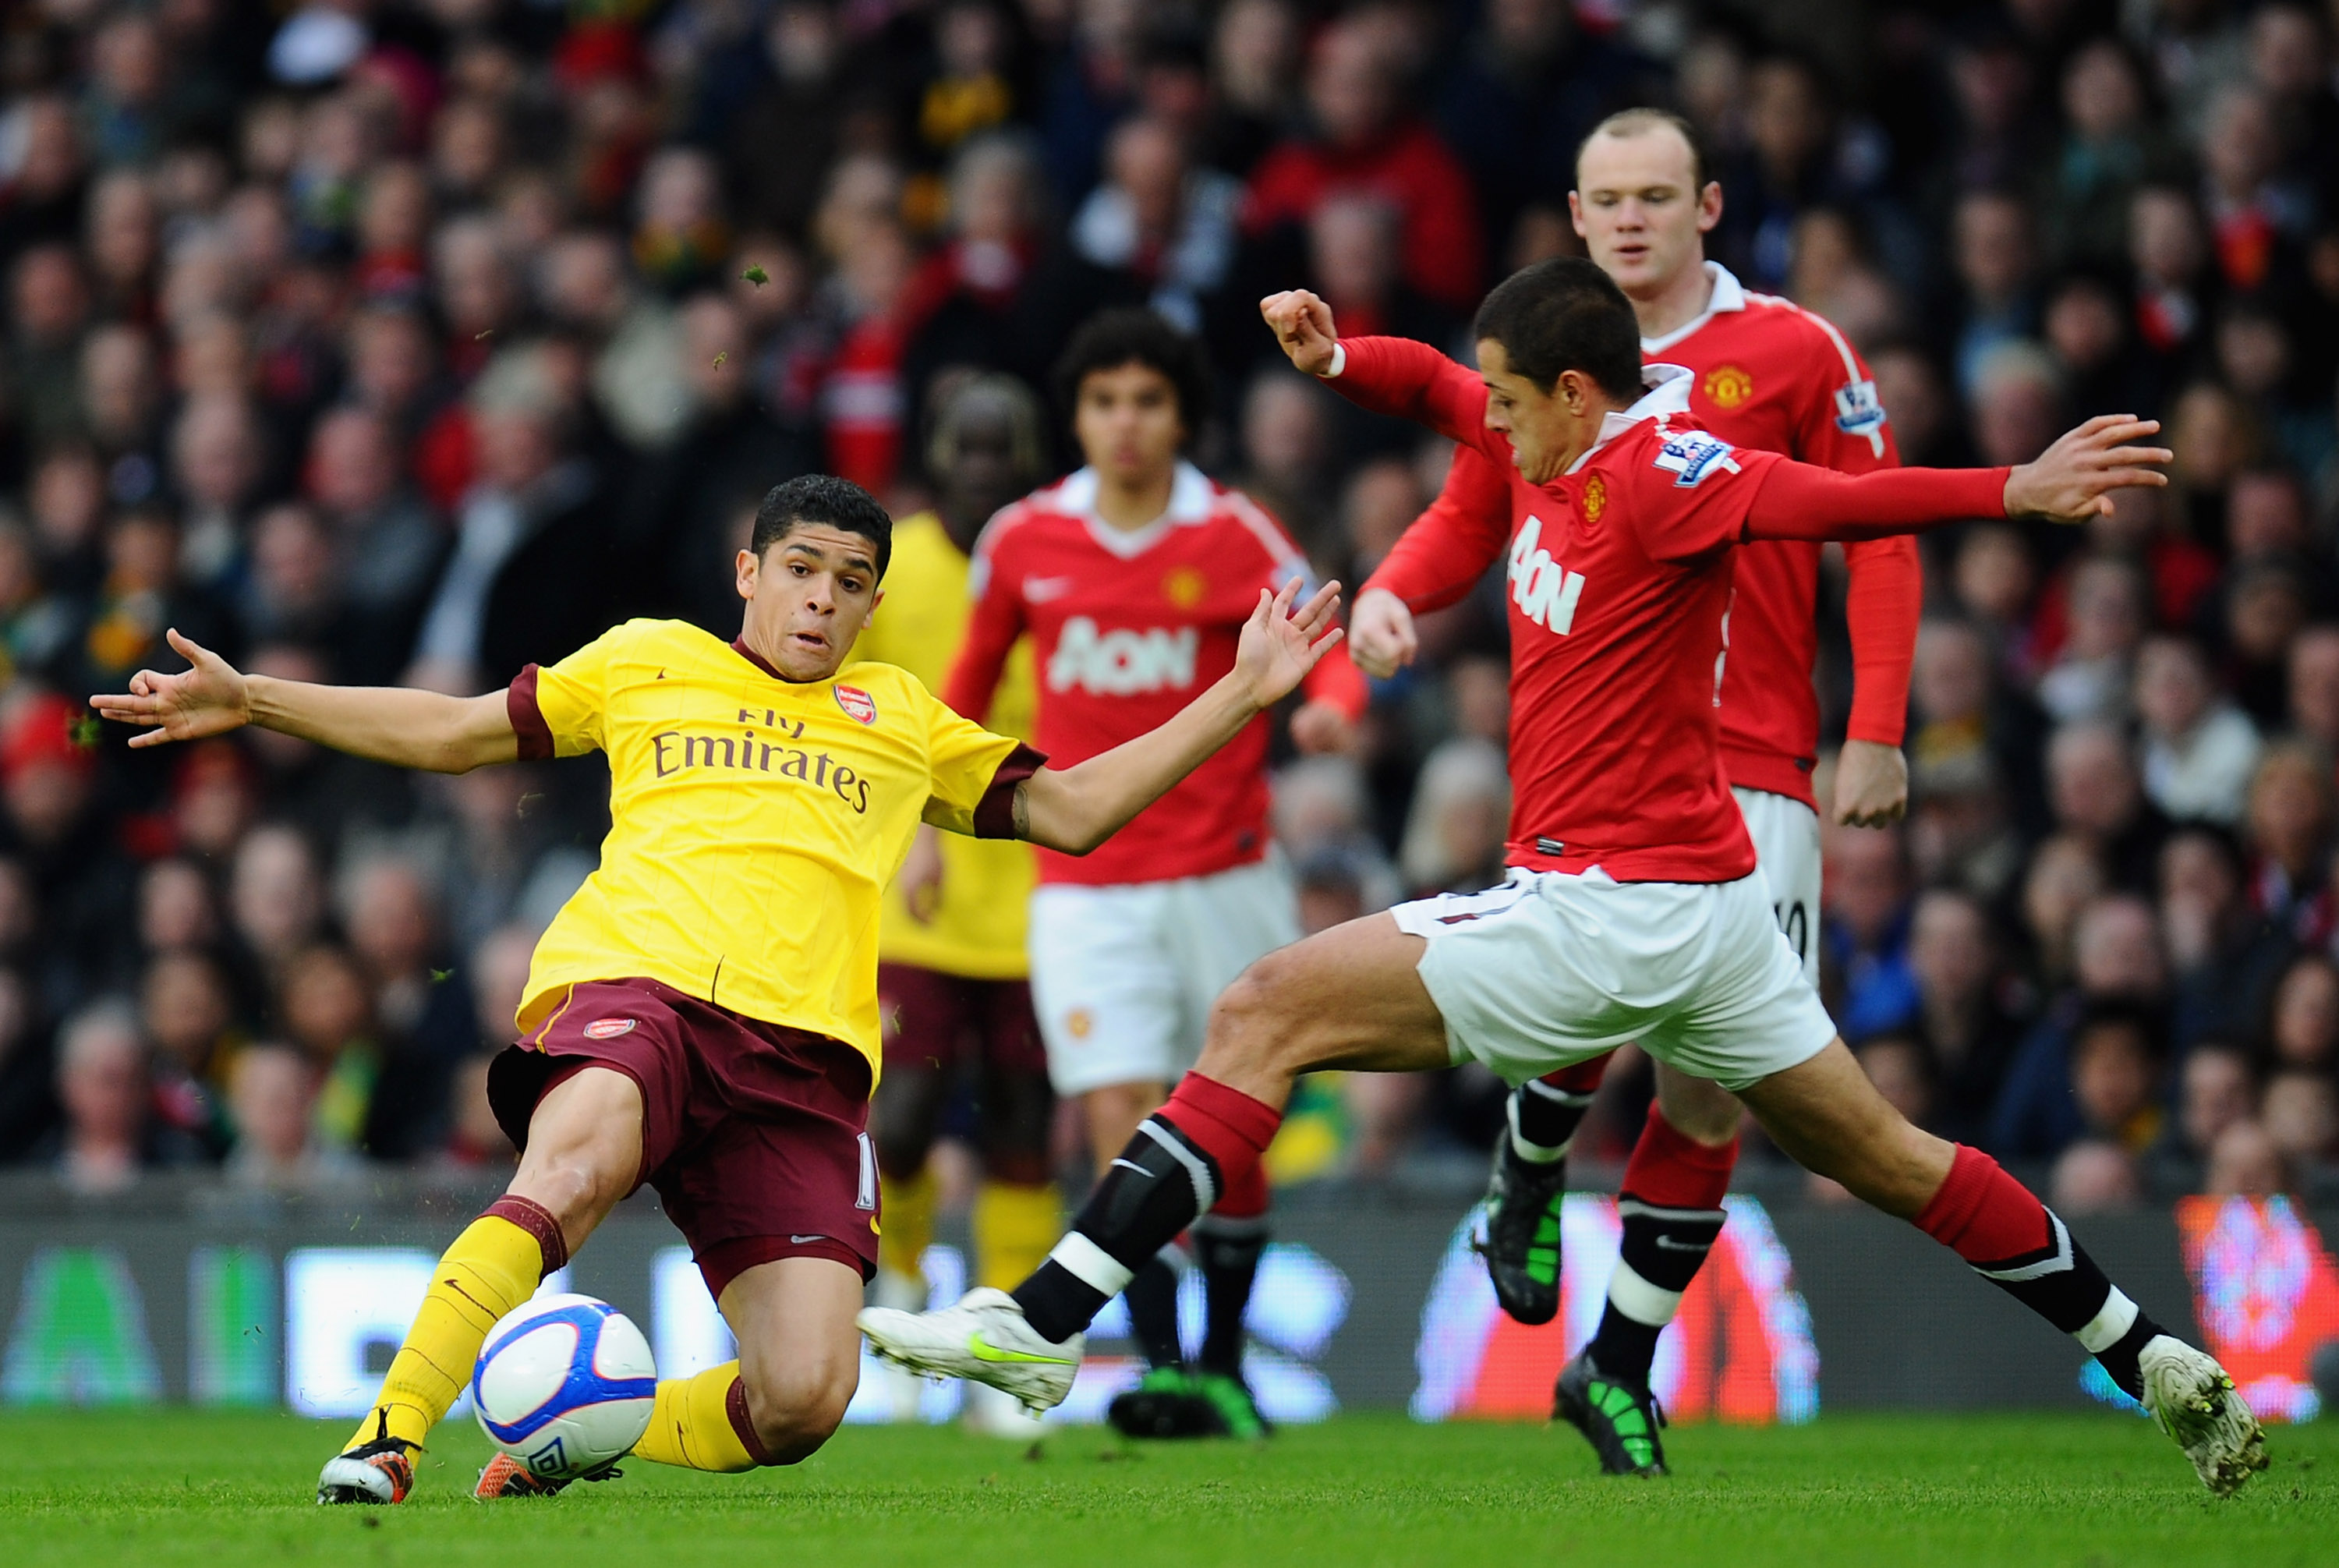 MANCHESTER, ENGLAND - MARCH 12:  Denilson of Arsenal and Javier Hernandez of Manchester United challenge for the ball during the FA Cup sponsored by E.On Sixth Round match between Manchester United and Arsenal at Old Trafford on March 12, 2011 in Manchest